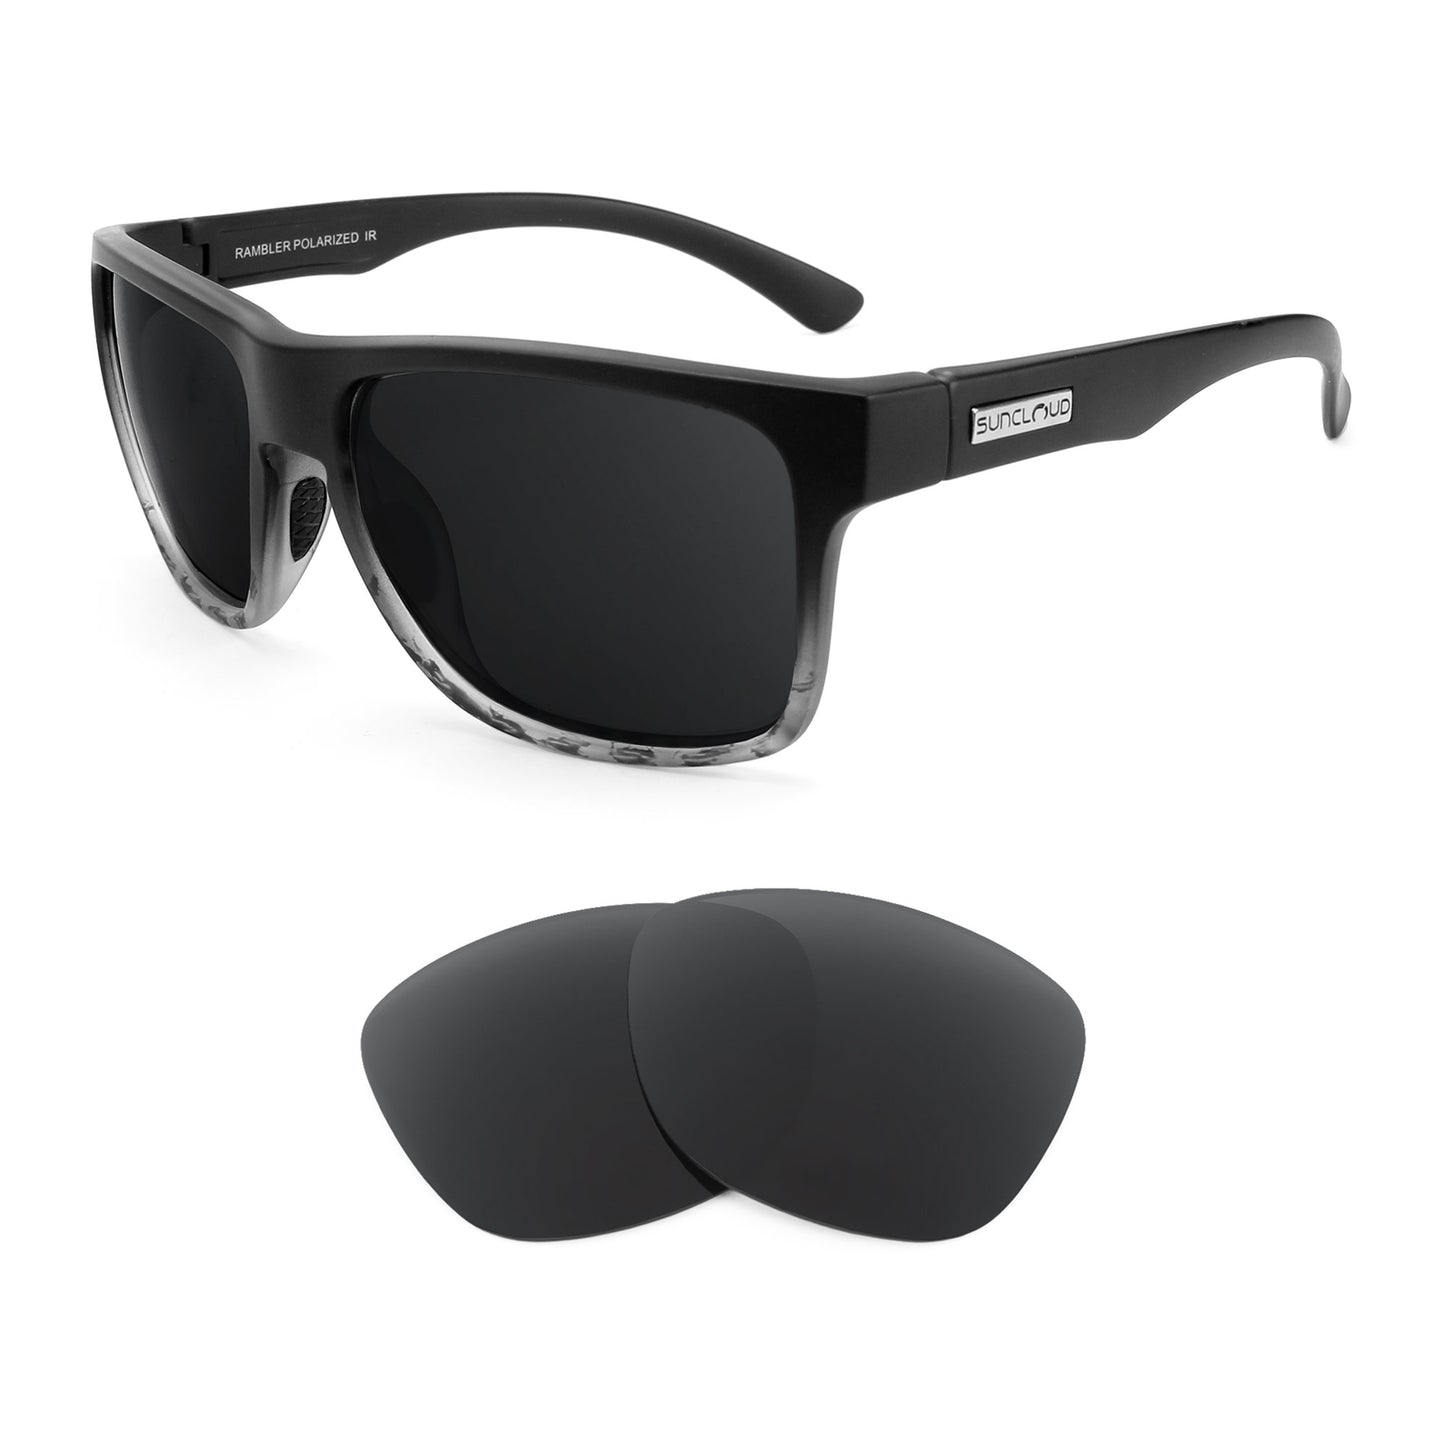 Suncloud Rambler sunglasses with replacement lenses